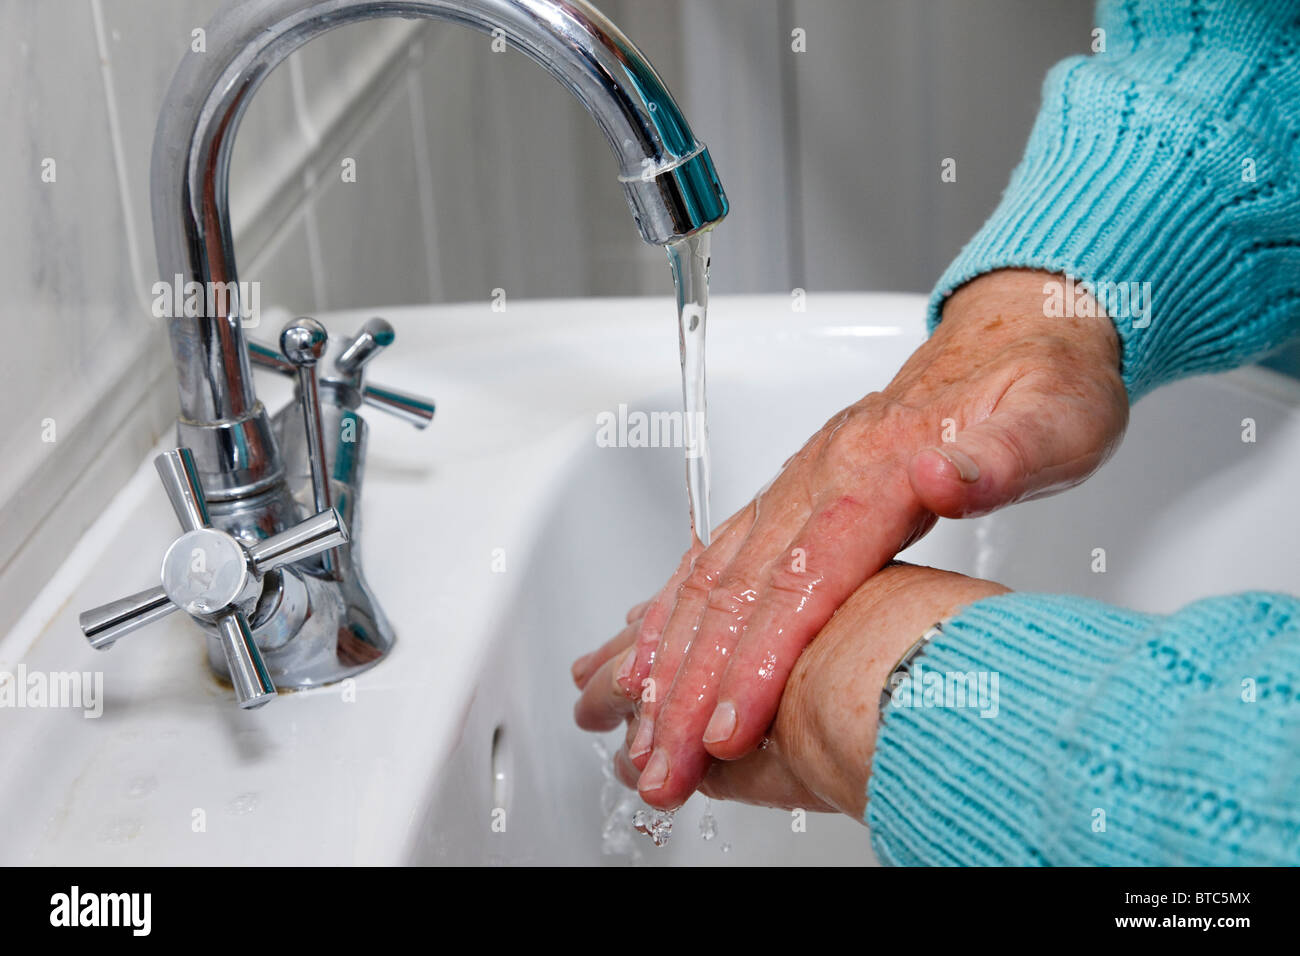 A senior elderly woman cleans by washing hands thoroughly under running tap water in a handbasin to protect against disease germs. England UK Britain Stock Photo